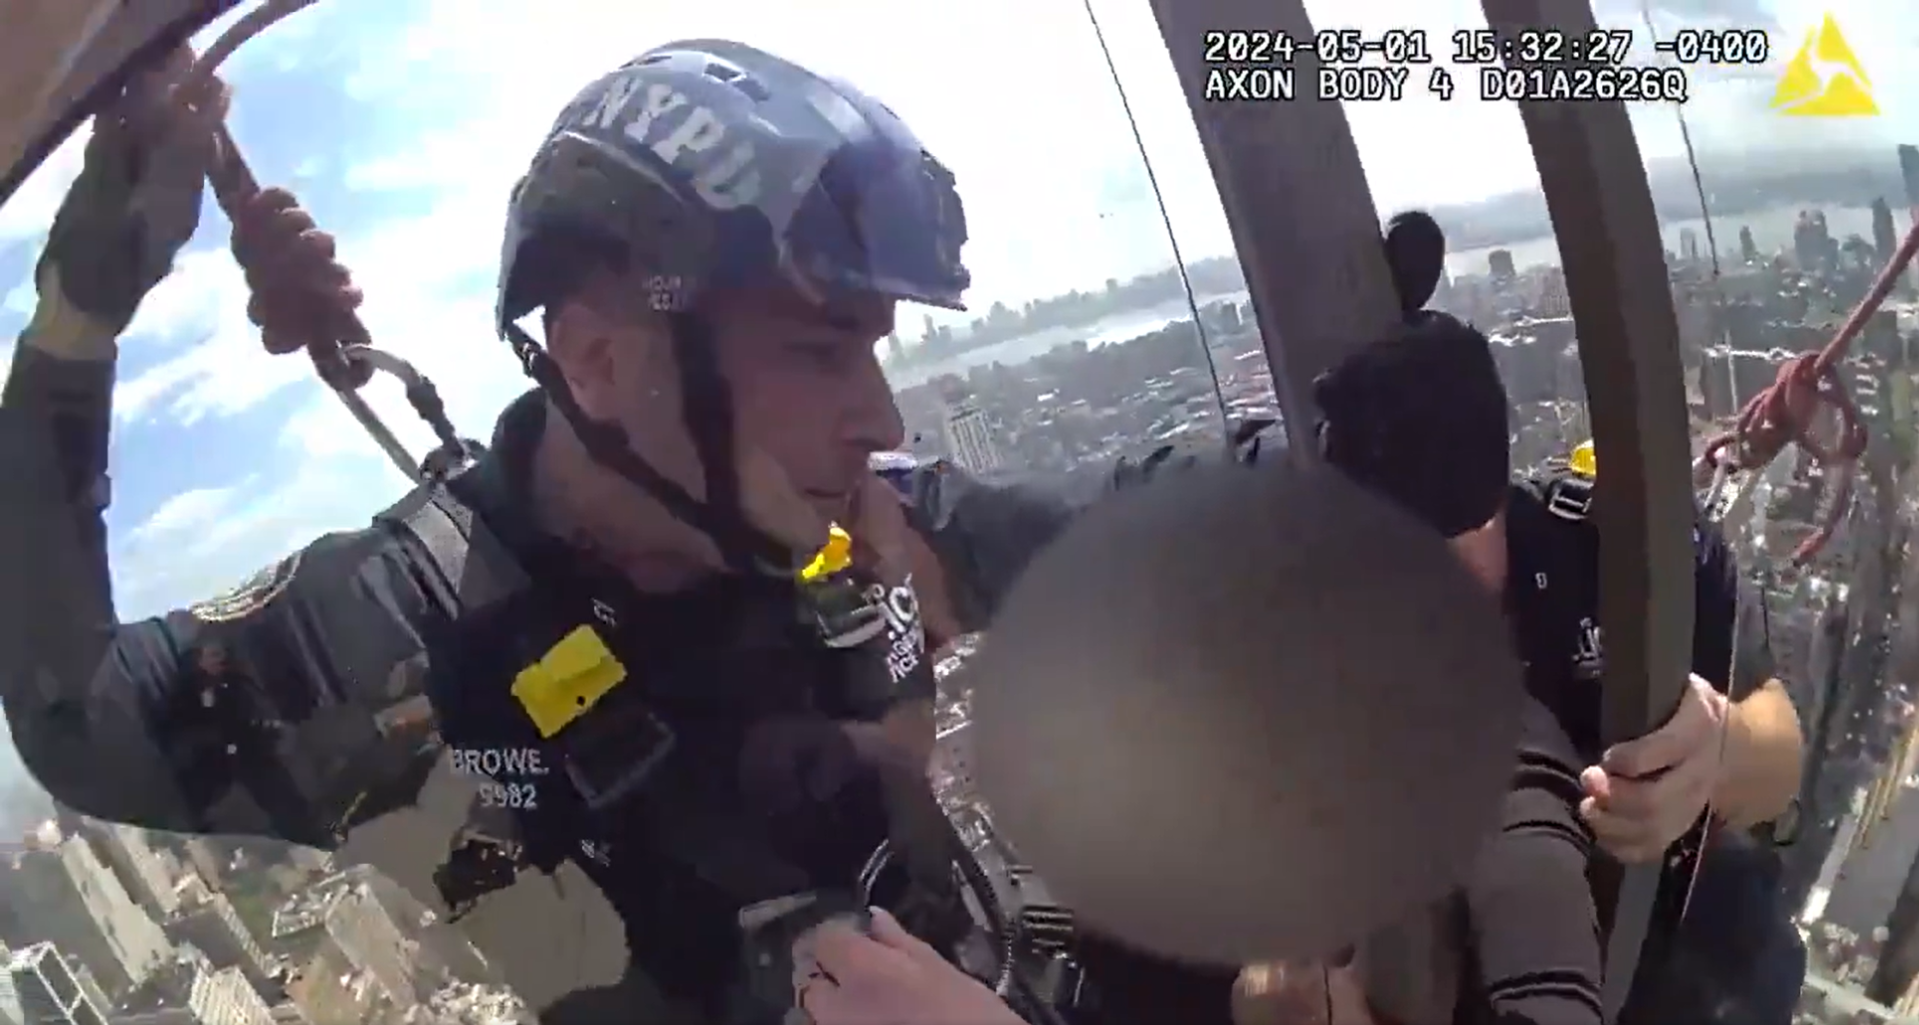 Video: NYPD conducts rescue operation of distraught woman standing on ledge 54 stories up